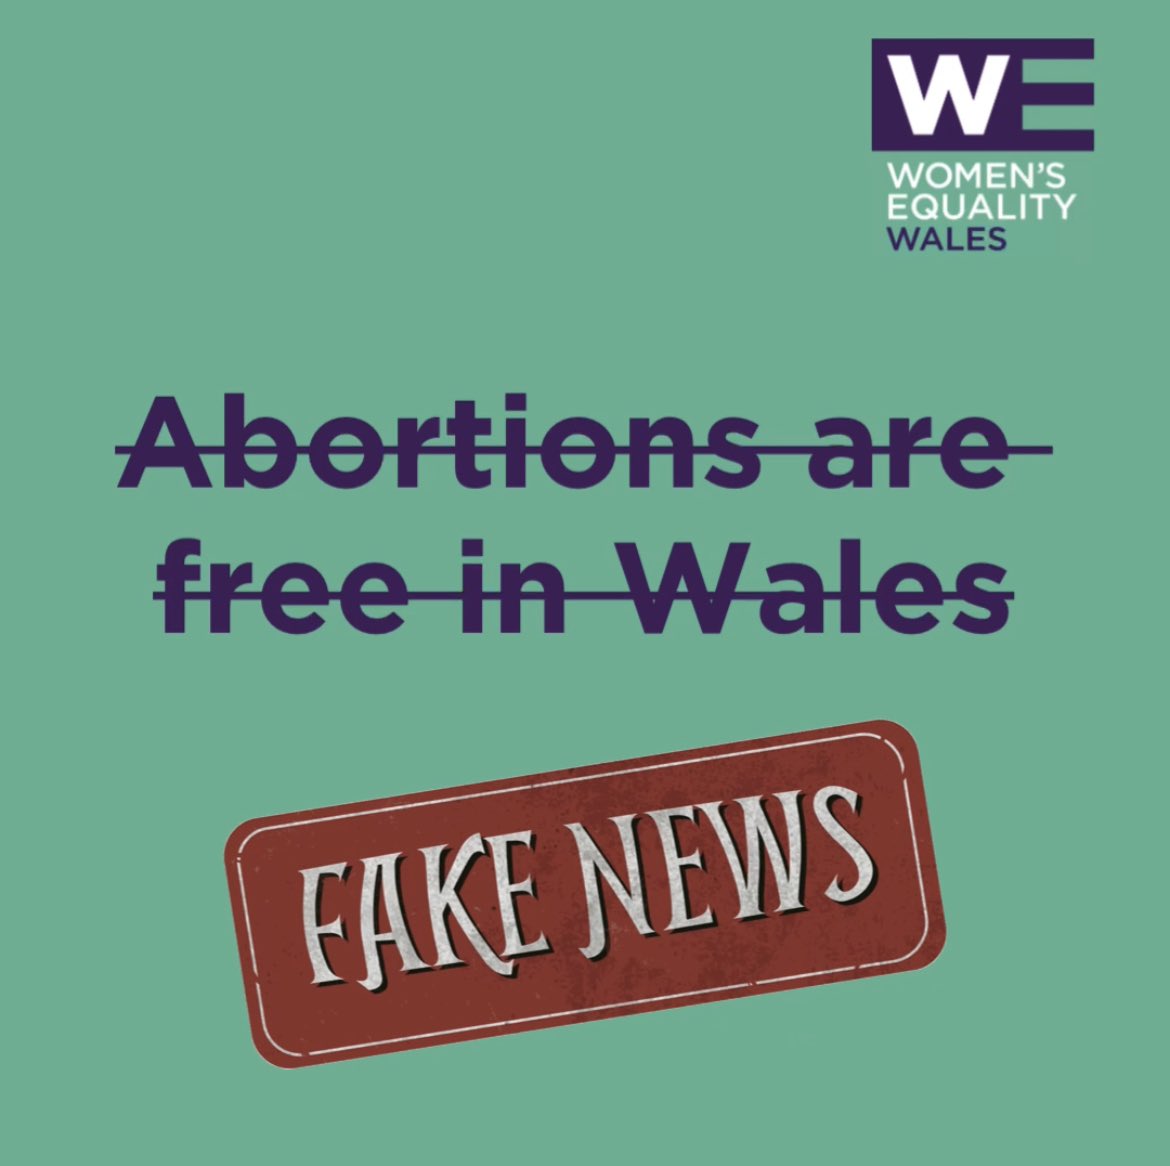 In many parts of Wales there’s no abortion care beyond 9 weeks and after 18 weeks there is no care available at all. Women being sent to England and forced to pay hundreds for travel and accommodation. Sign our petition for safe, local abortion care bit.ly/3IYAiYH